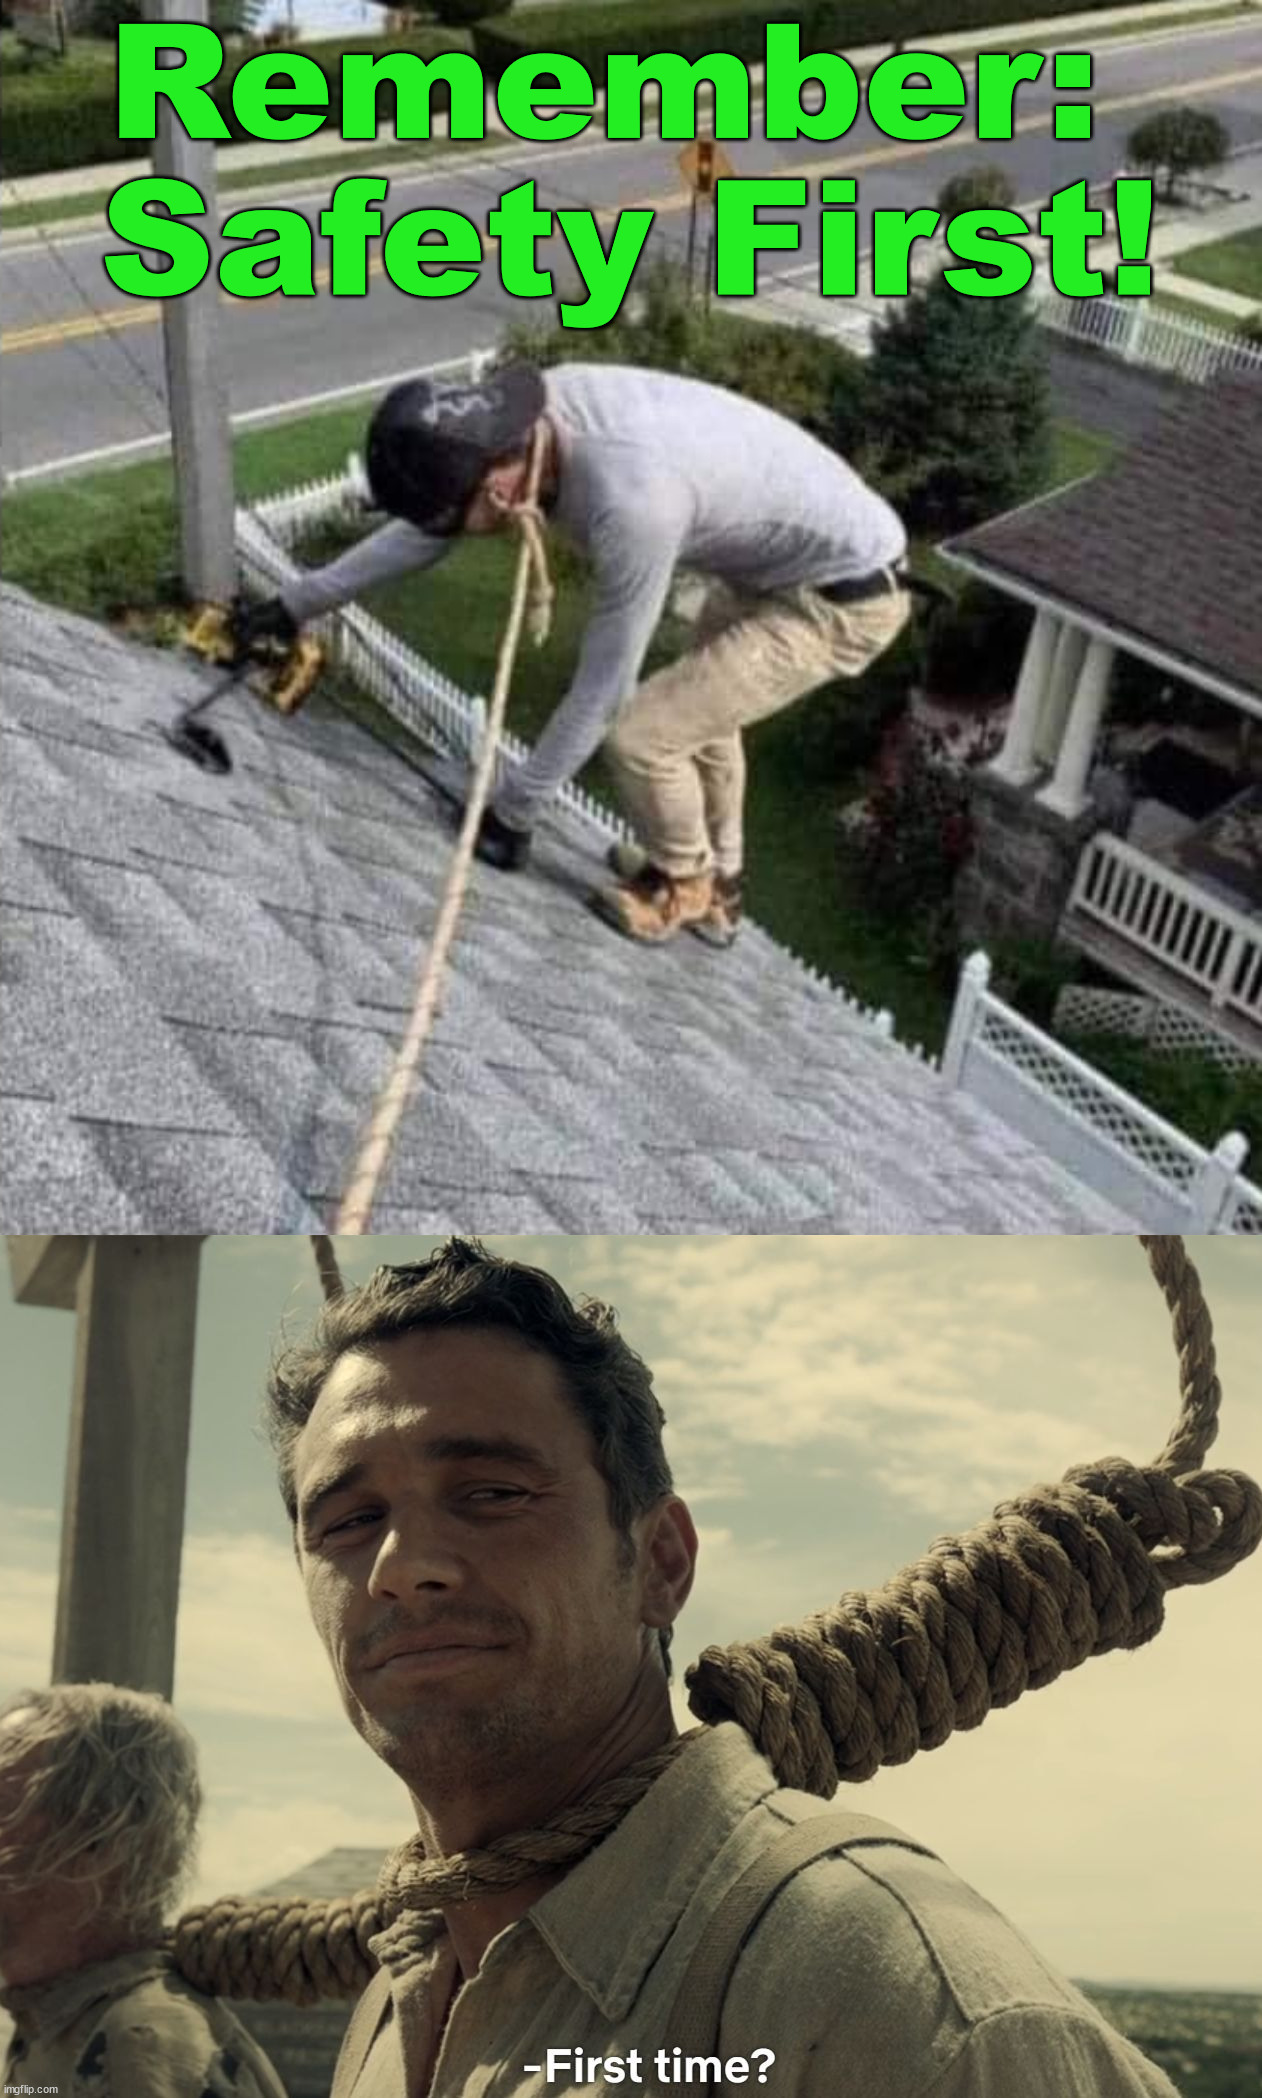 Just hanging around the job site | Remember: 
Safety First! | image tagged in first time,hanging out,roof,wow you failed this job | made w/ Imgflip meme maker